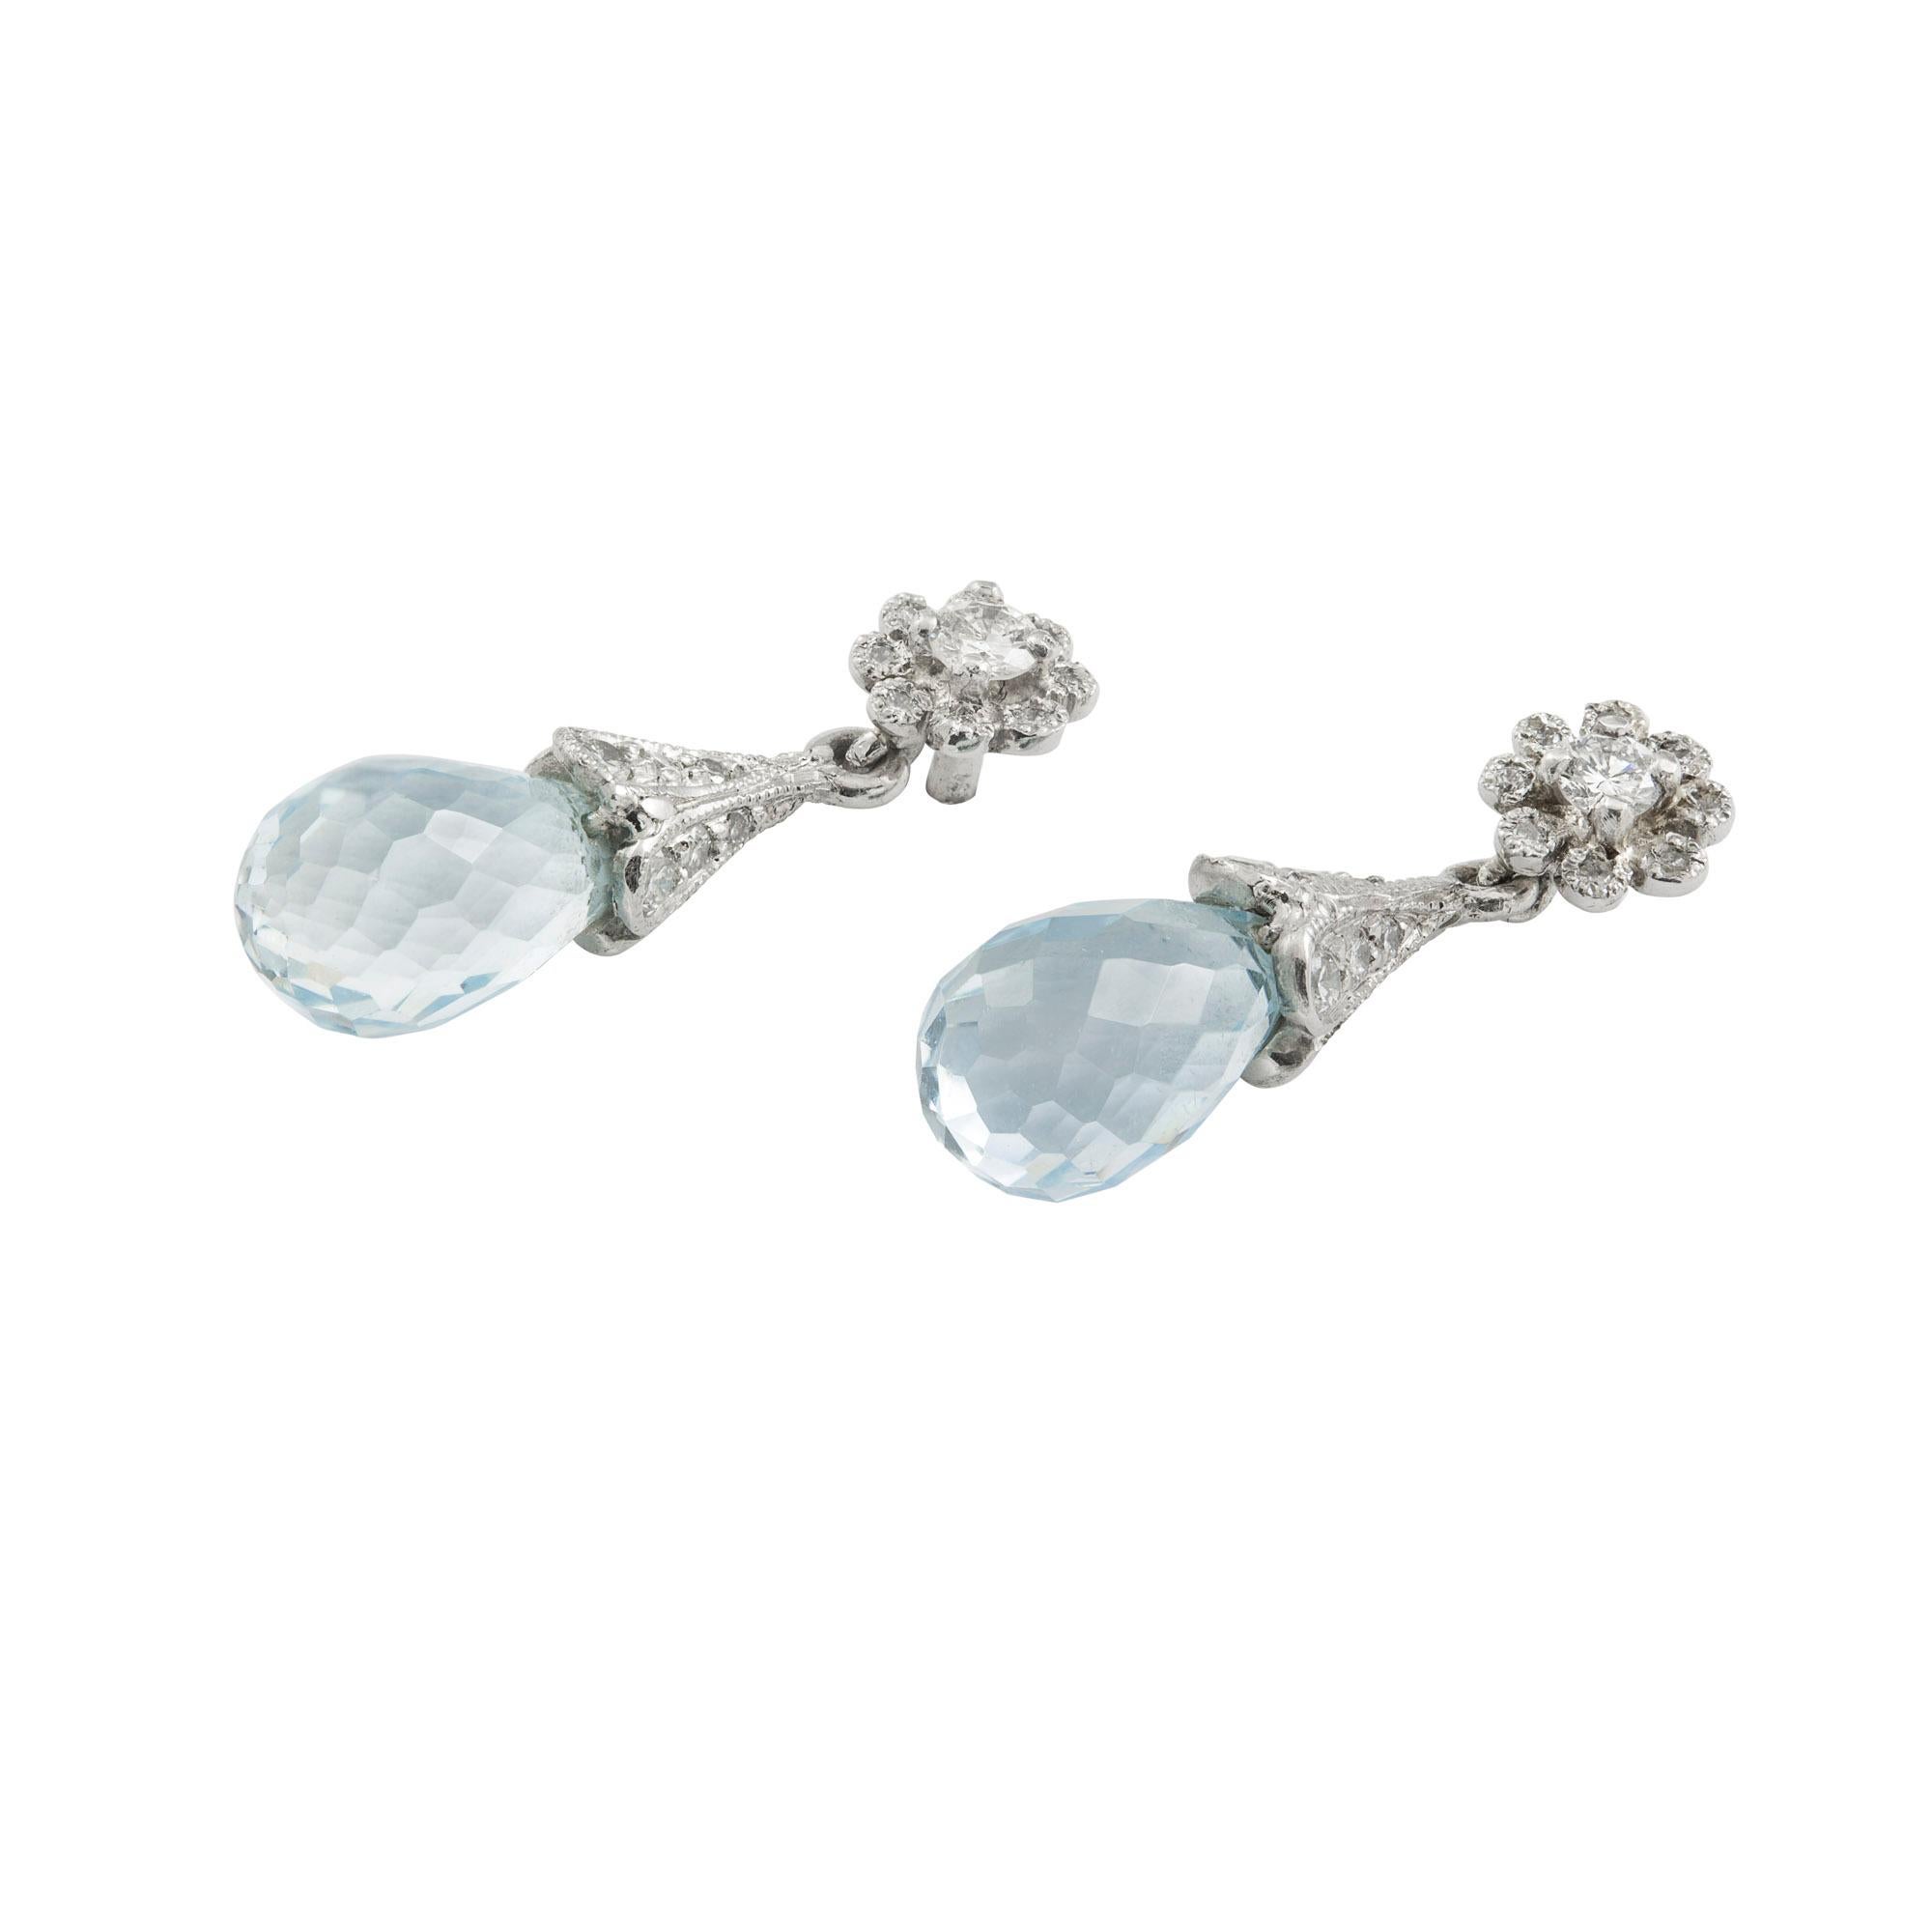 A pair of diamond and aquamarine briolette drop earrings, each earring comprising aquamarine briolette drop weighing total of 0.6 carats with diamond set cap suspended from a diamond-set daisy cluster top, all millegrain set to a white mount with